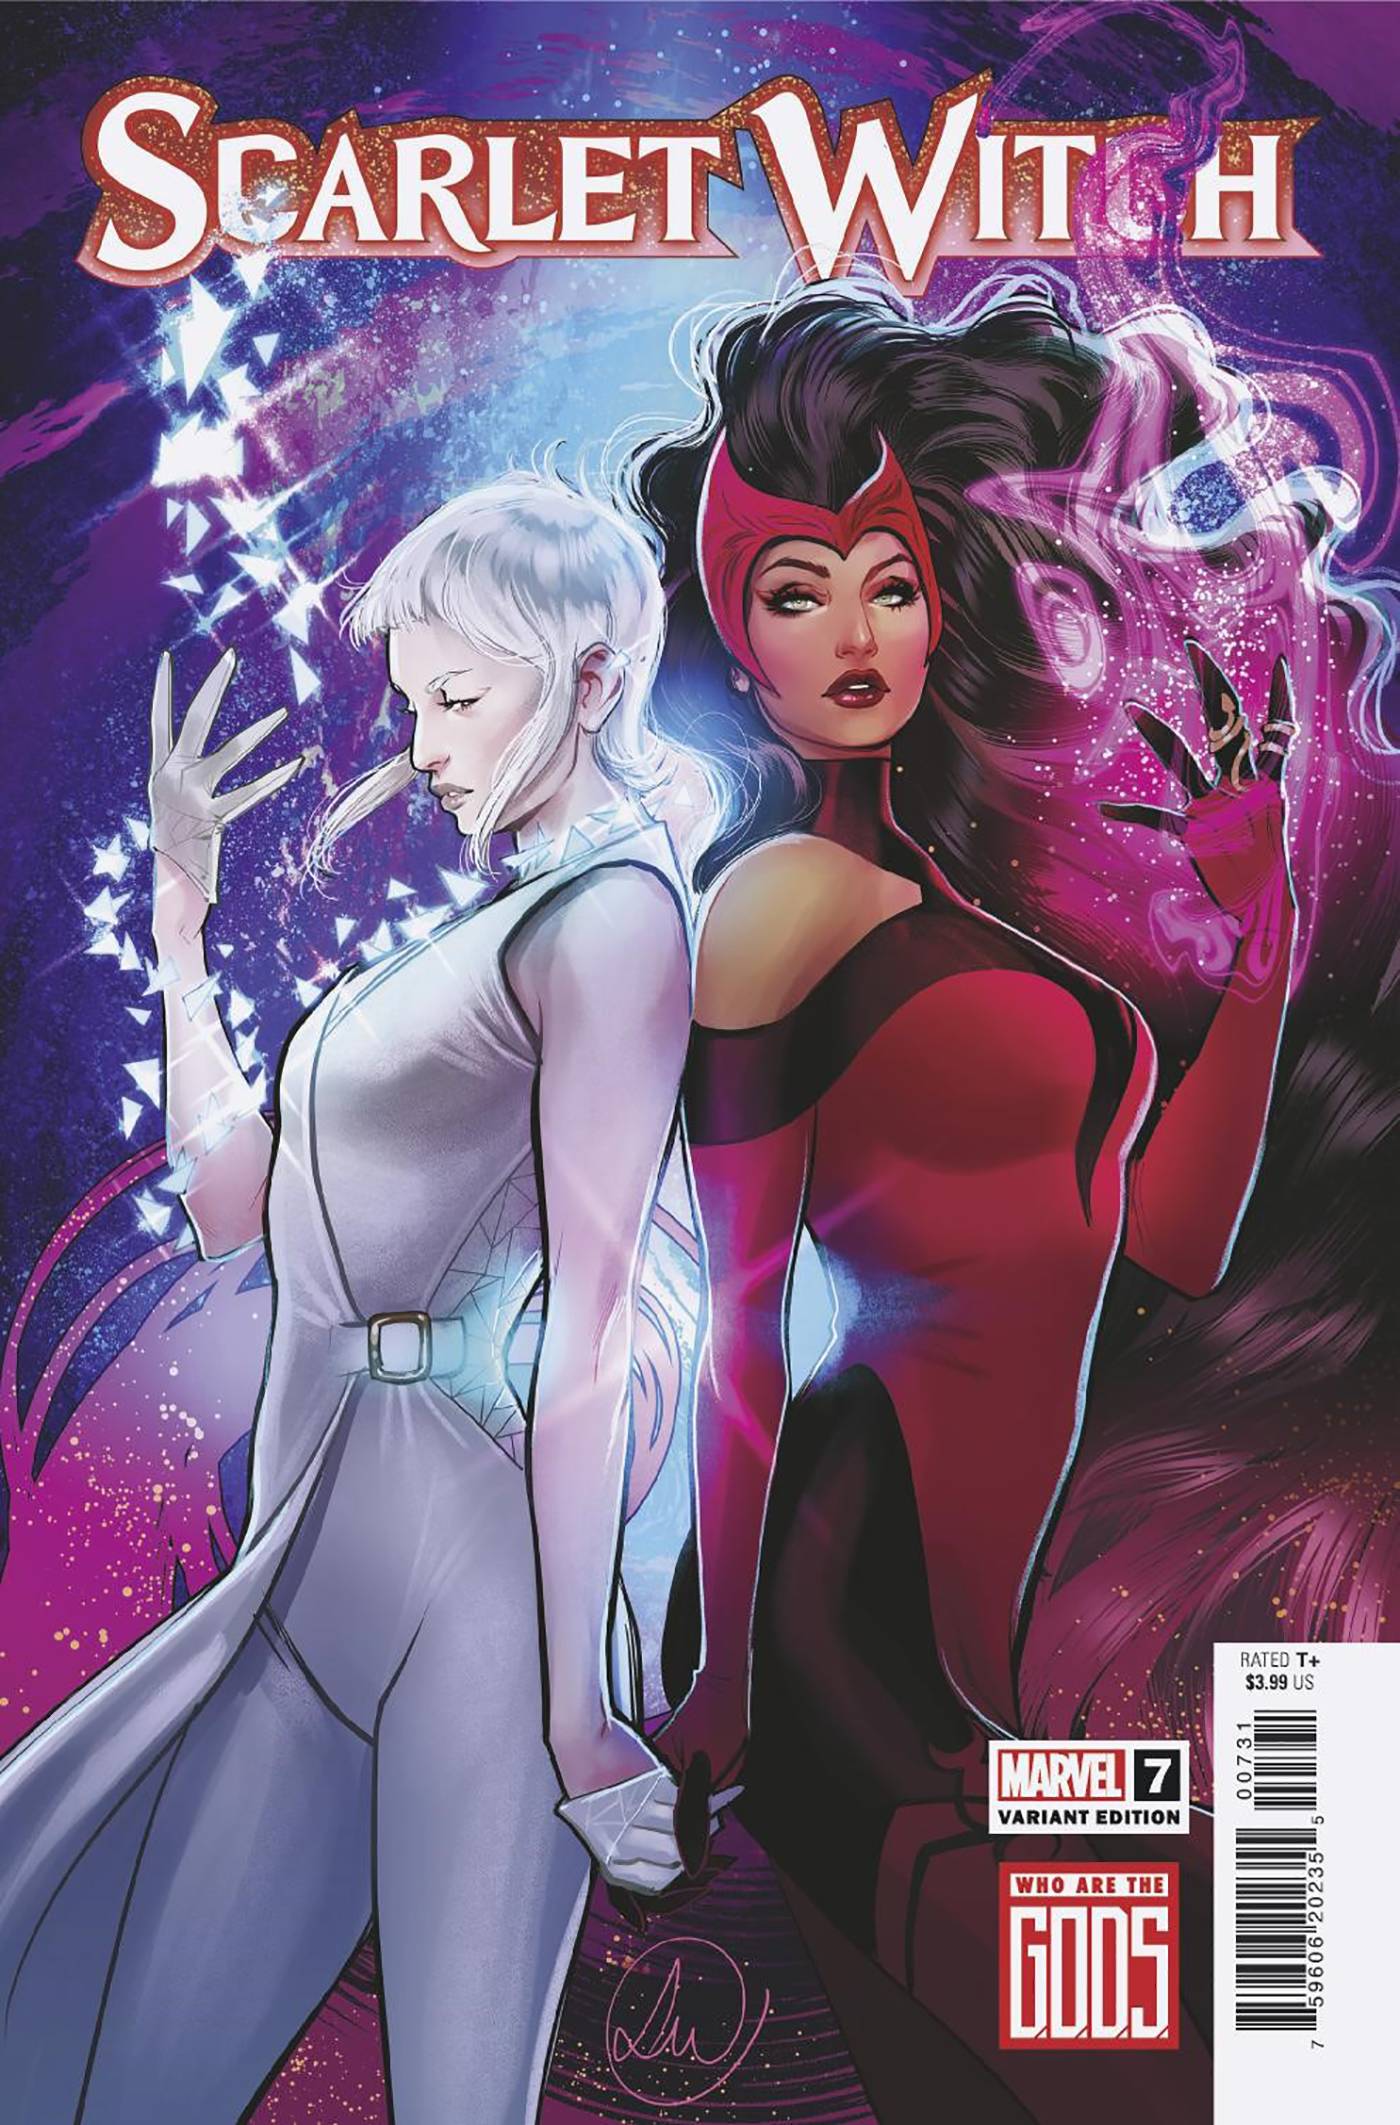 Scarlet Witch #7 Preview - The Comic Book Dispatch